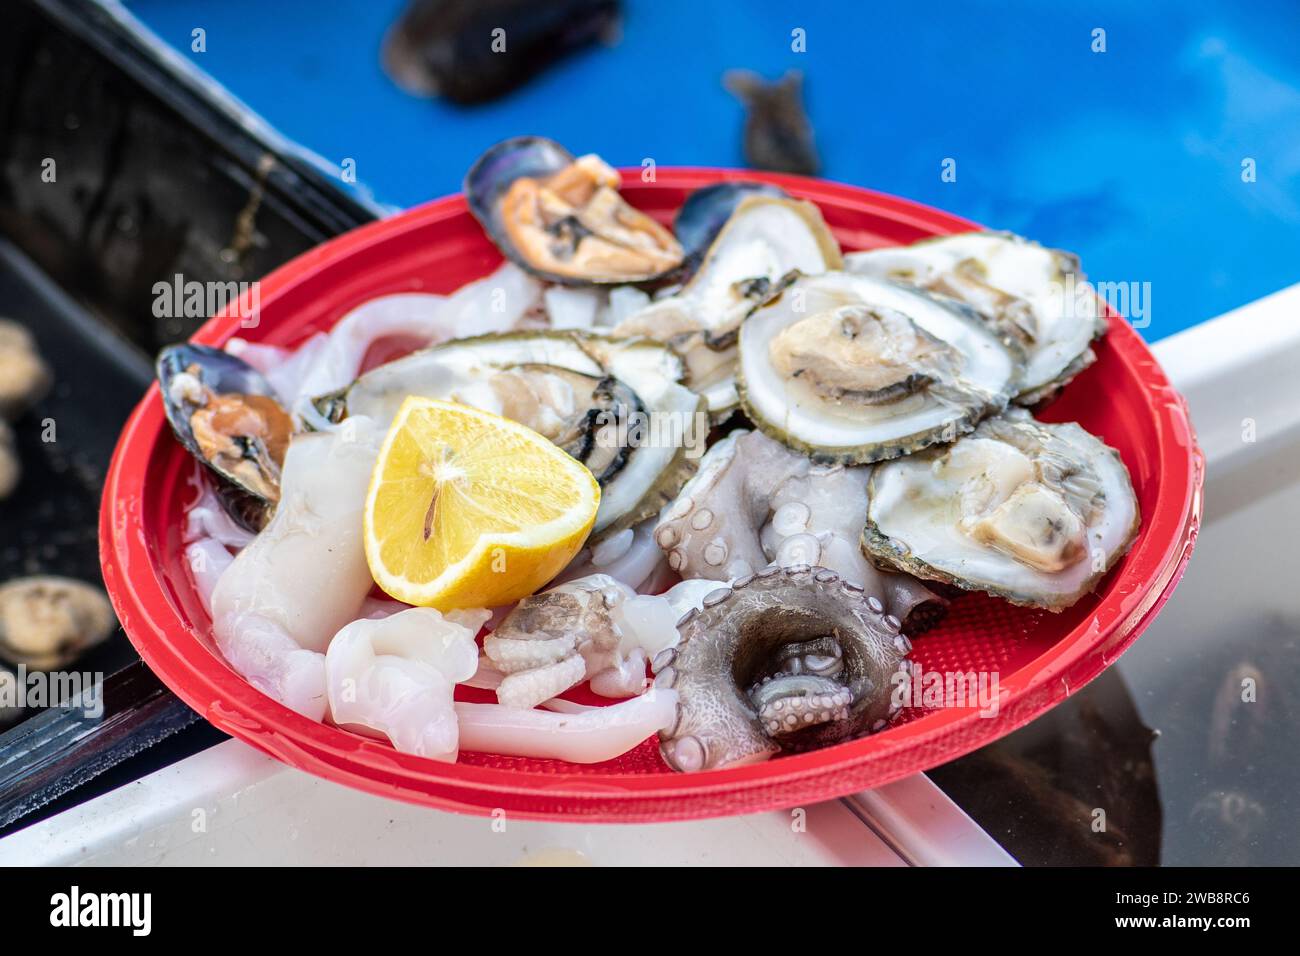 Plastic plate with raw pieces of octopus, cuttlefish, black mussels, oysters, lemon, ready to eat, in a street food market in Bari, Puglia, Italy Stock Photo